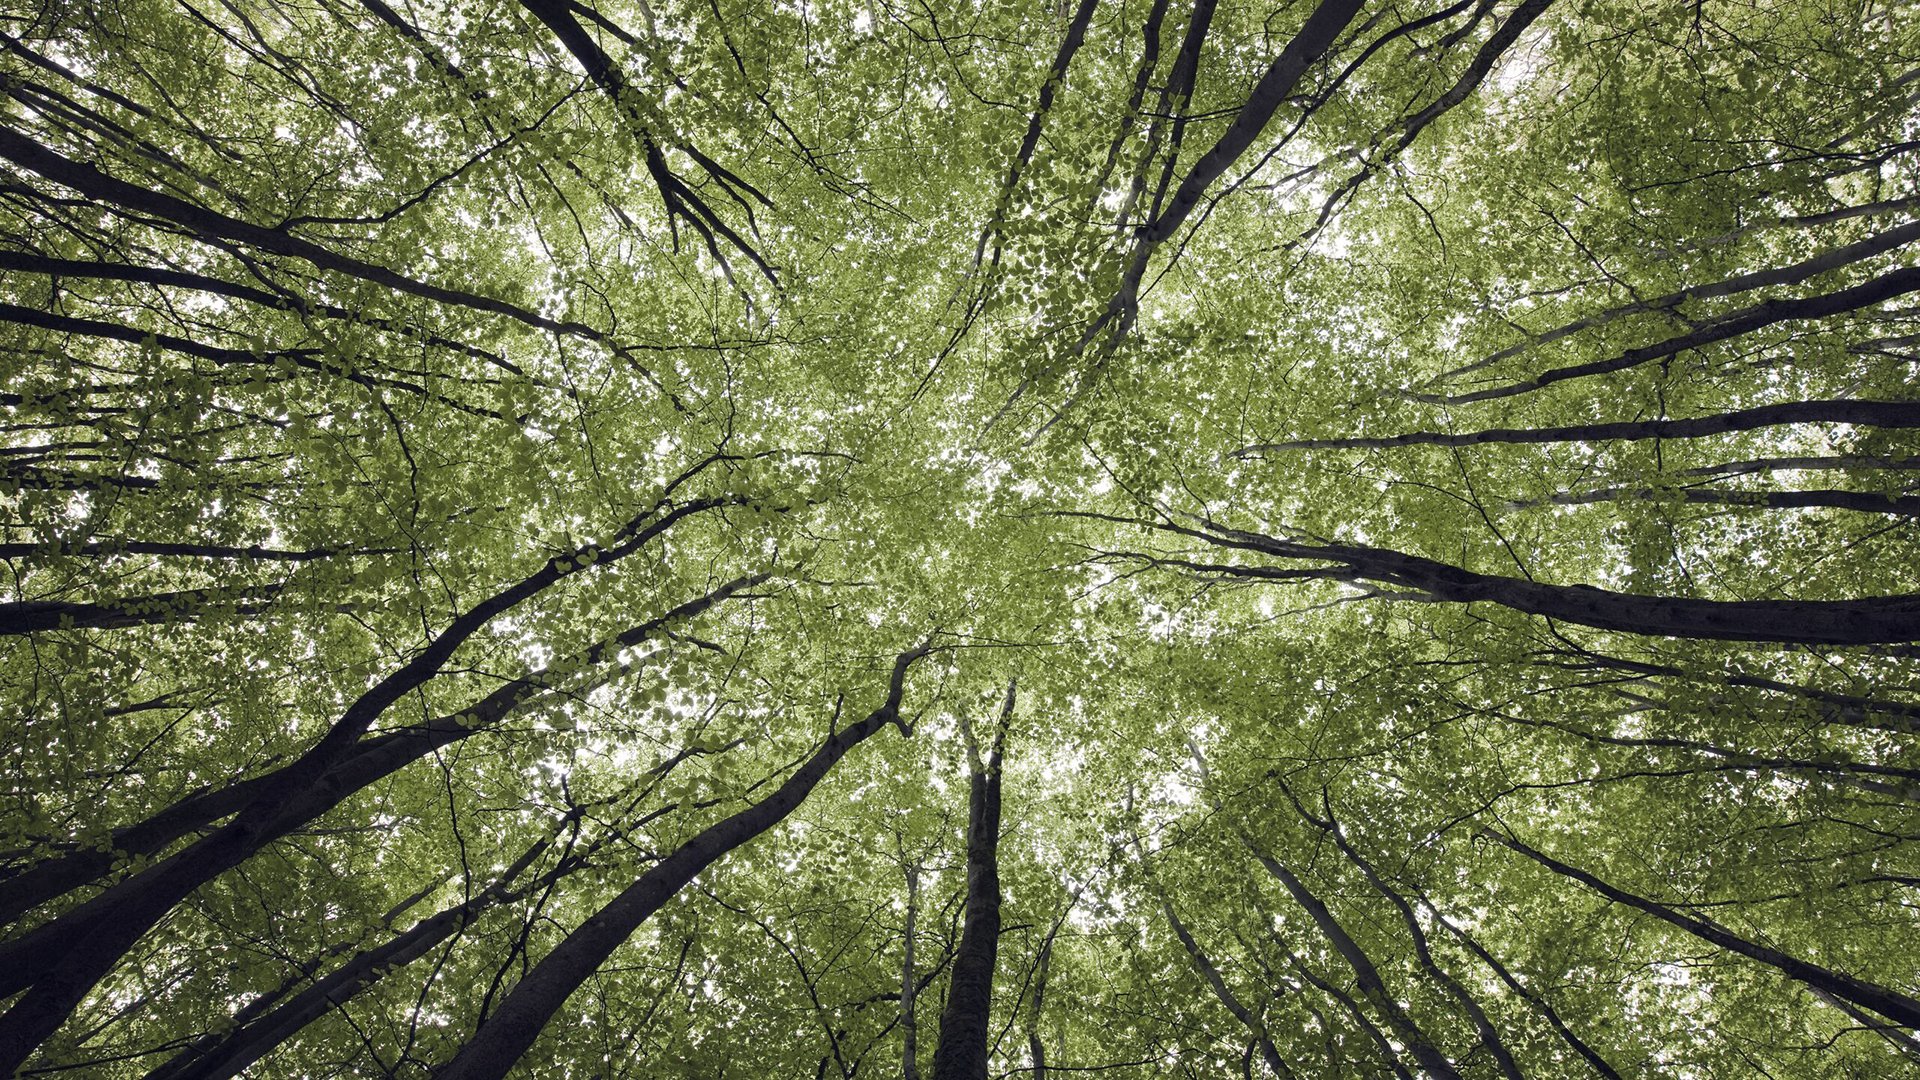 Upward view of trees inside a forest